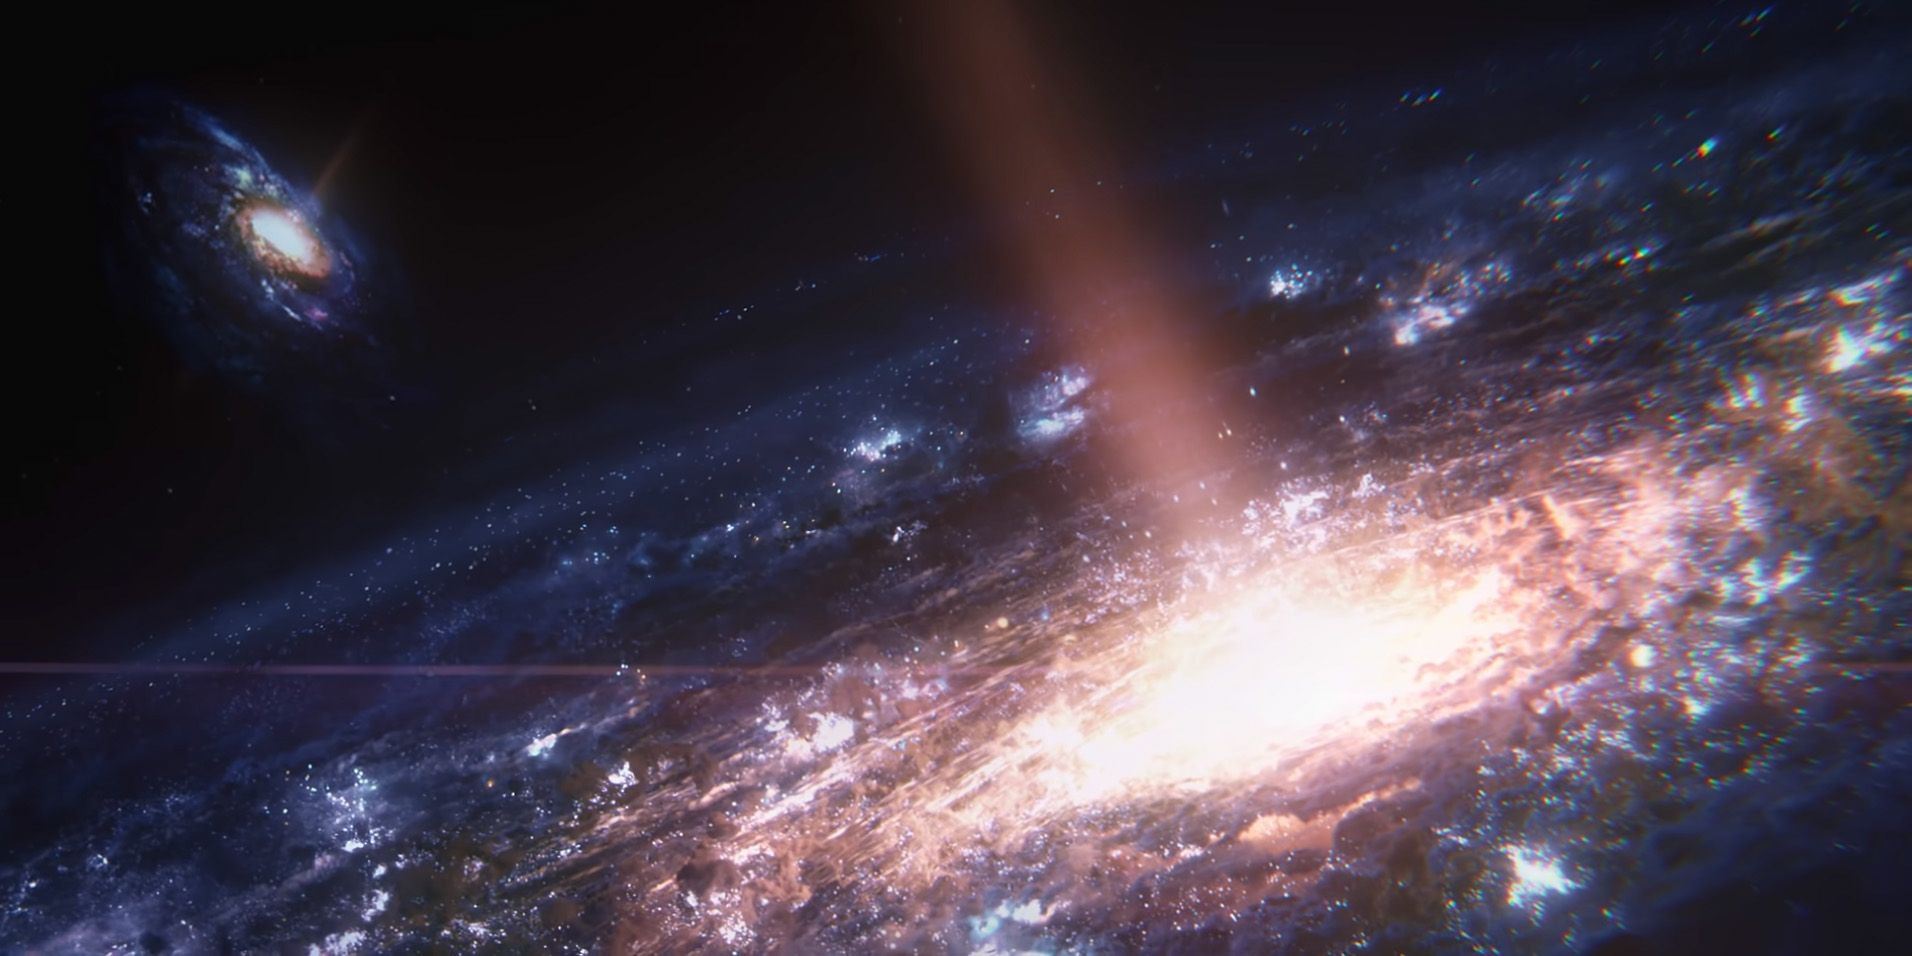 The Milky Way and Andromeda Galaxies in the 2020 Mass Effect Trailer